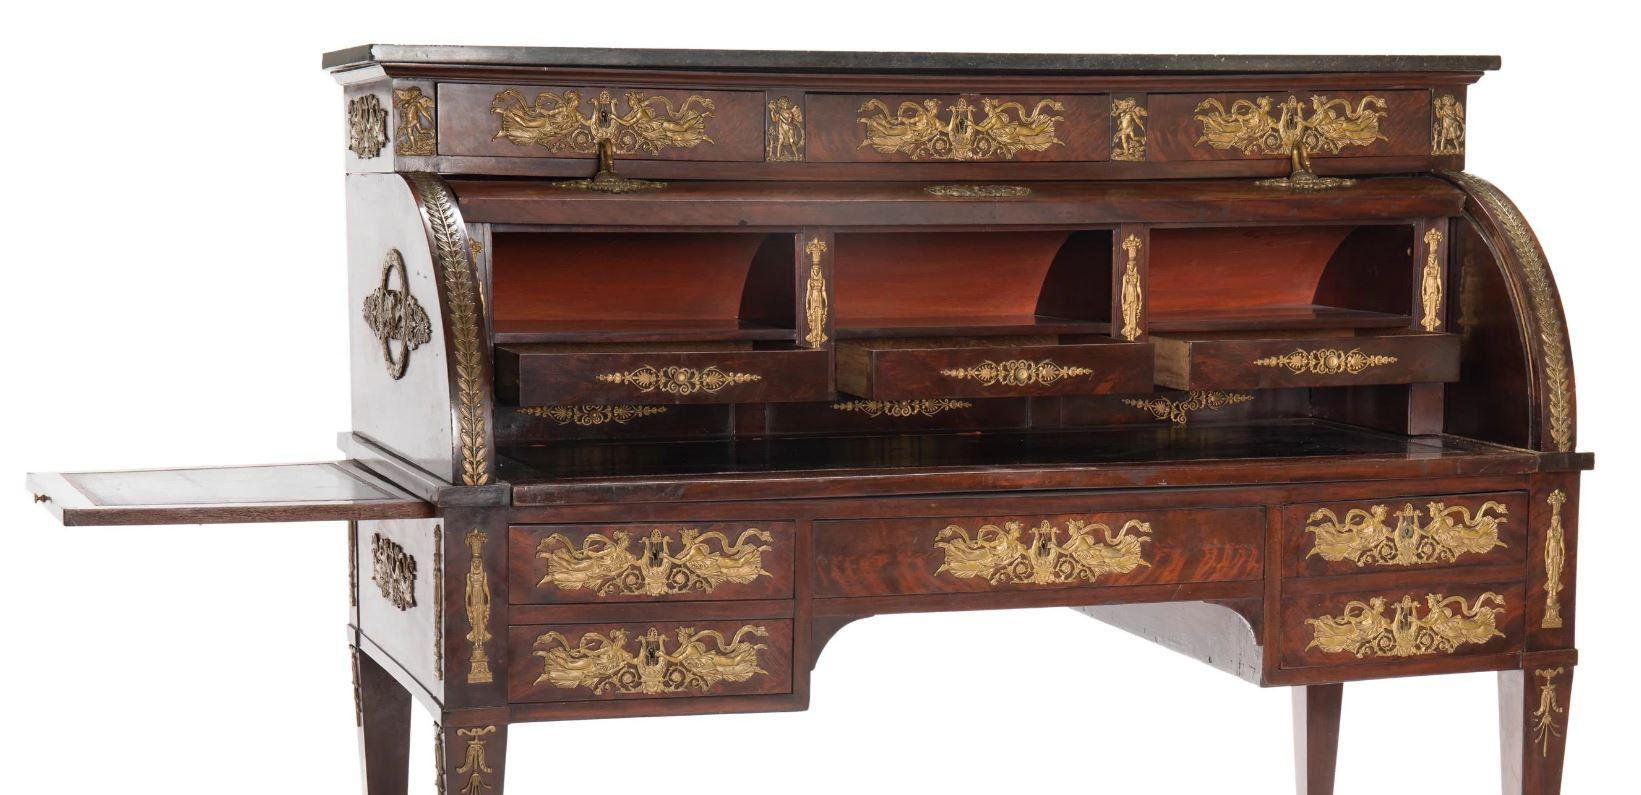 19th Century French Empire Style Mahogany Roll-Top Desk with Gilt Bronze-Mounted For Sale 6